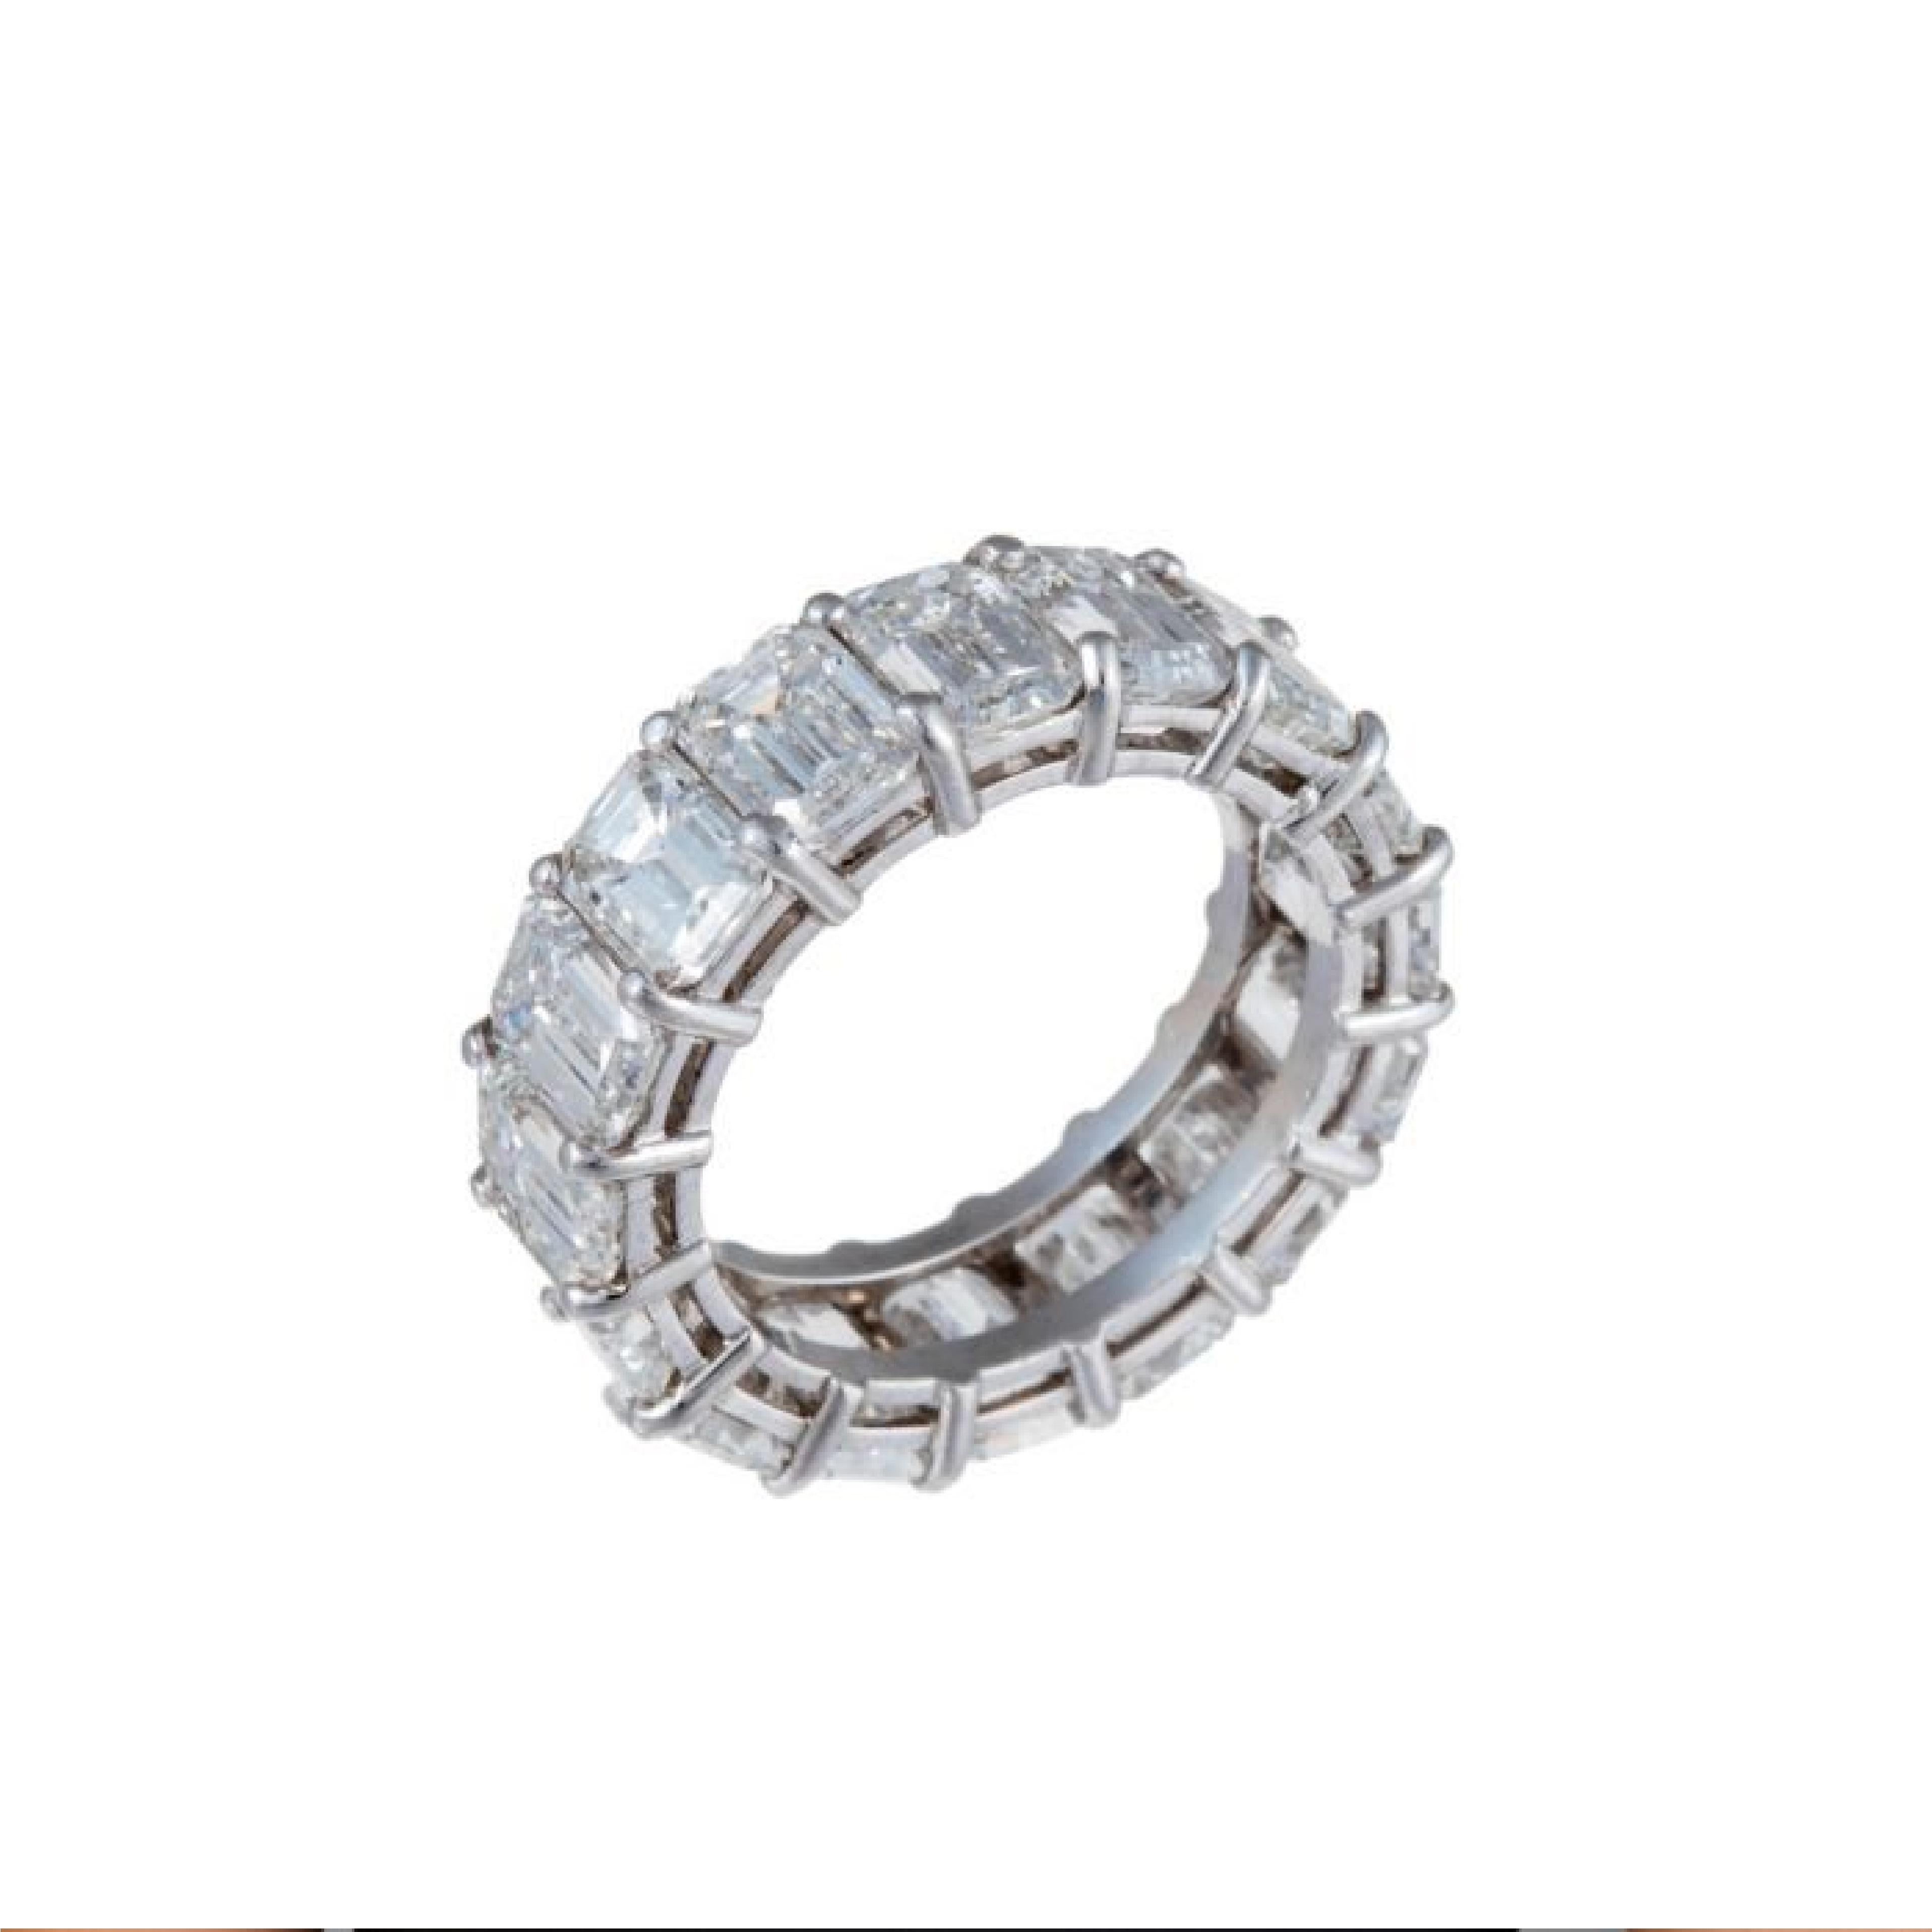 Platinum Emerald cut eternity diamond band with sixteen emerald cut diamonds. 
 
The diamond weight is 11.20 Carats, each stone approximately 0.70 carats. 

Ring size 6 1/2

Diamond specifications: 
F color, VVS-VS clarity

This product comes with a